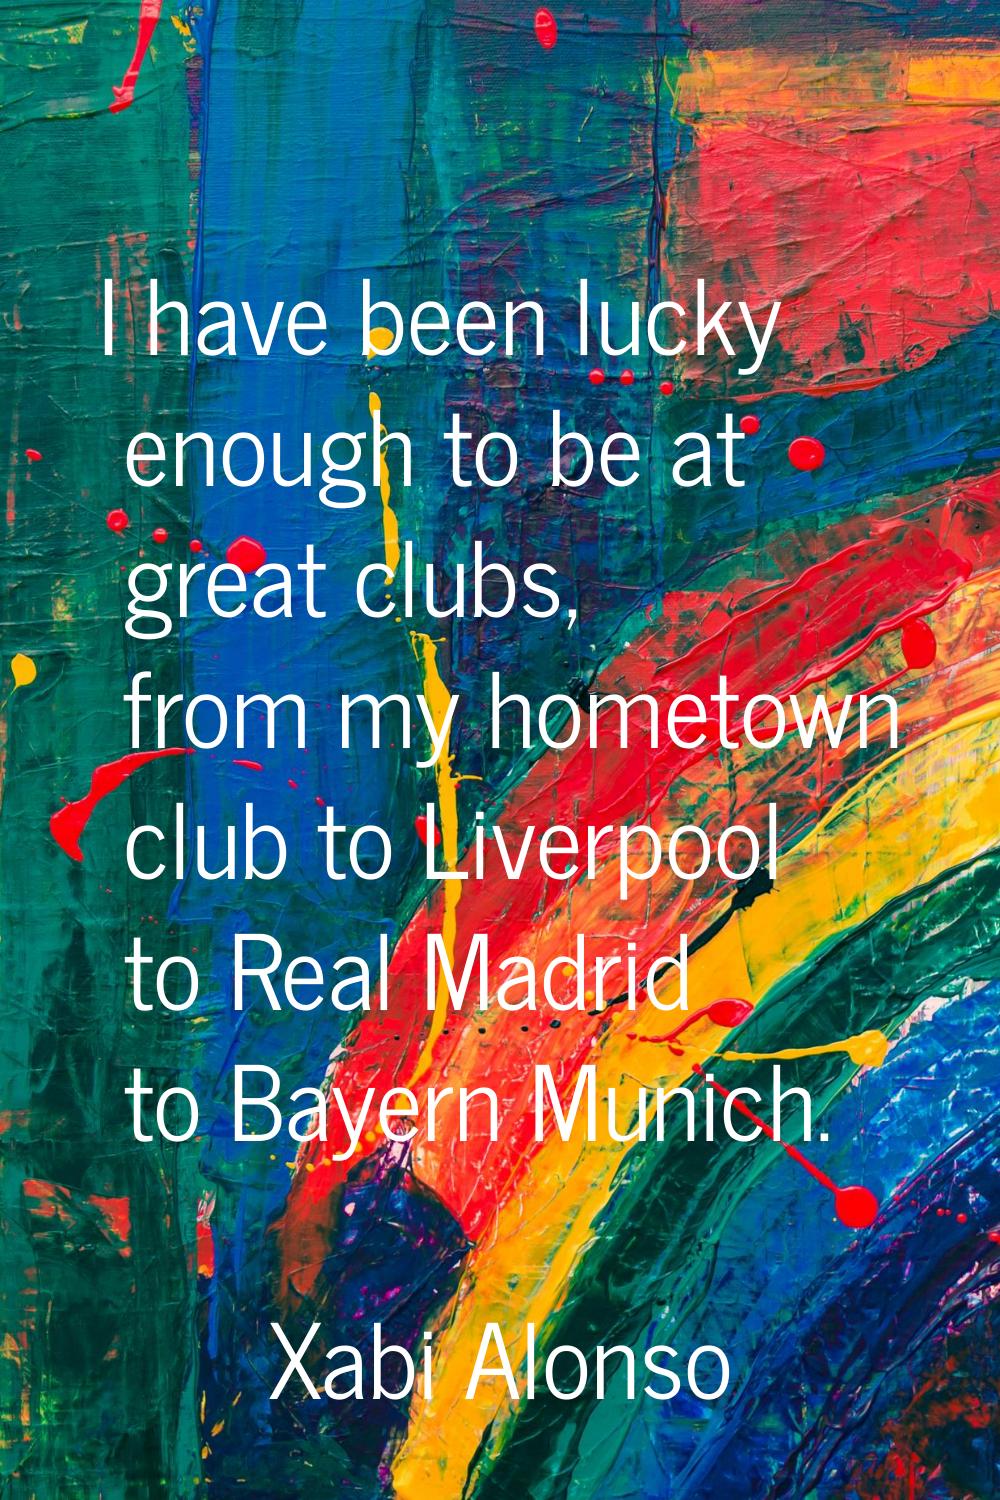 I have been lucky enough to be at great clubs, from my hometown club to Liverpool to Real Madrid to